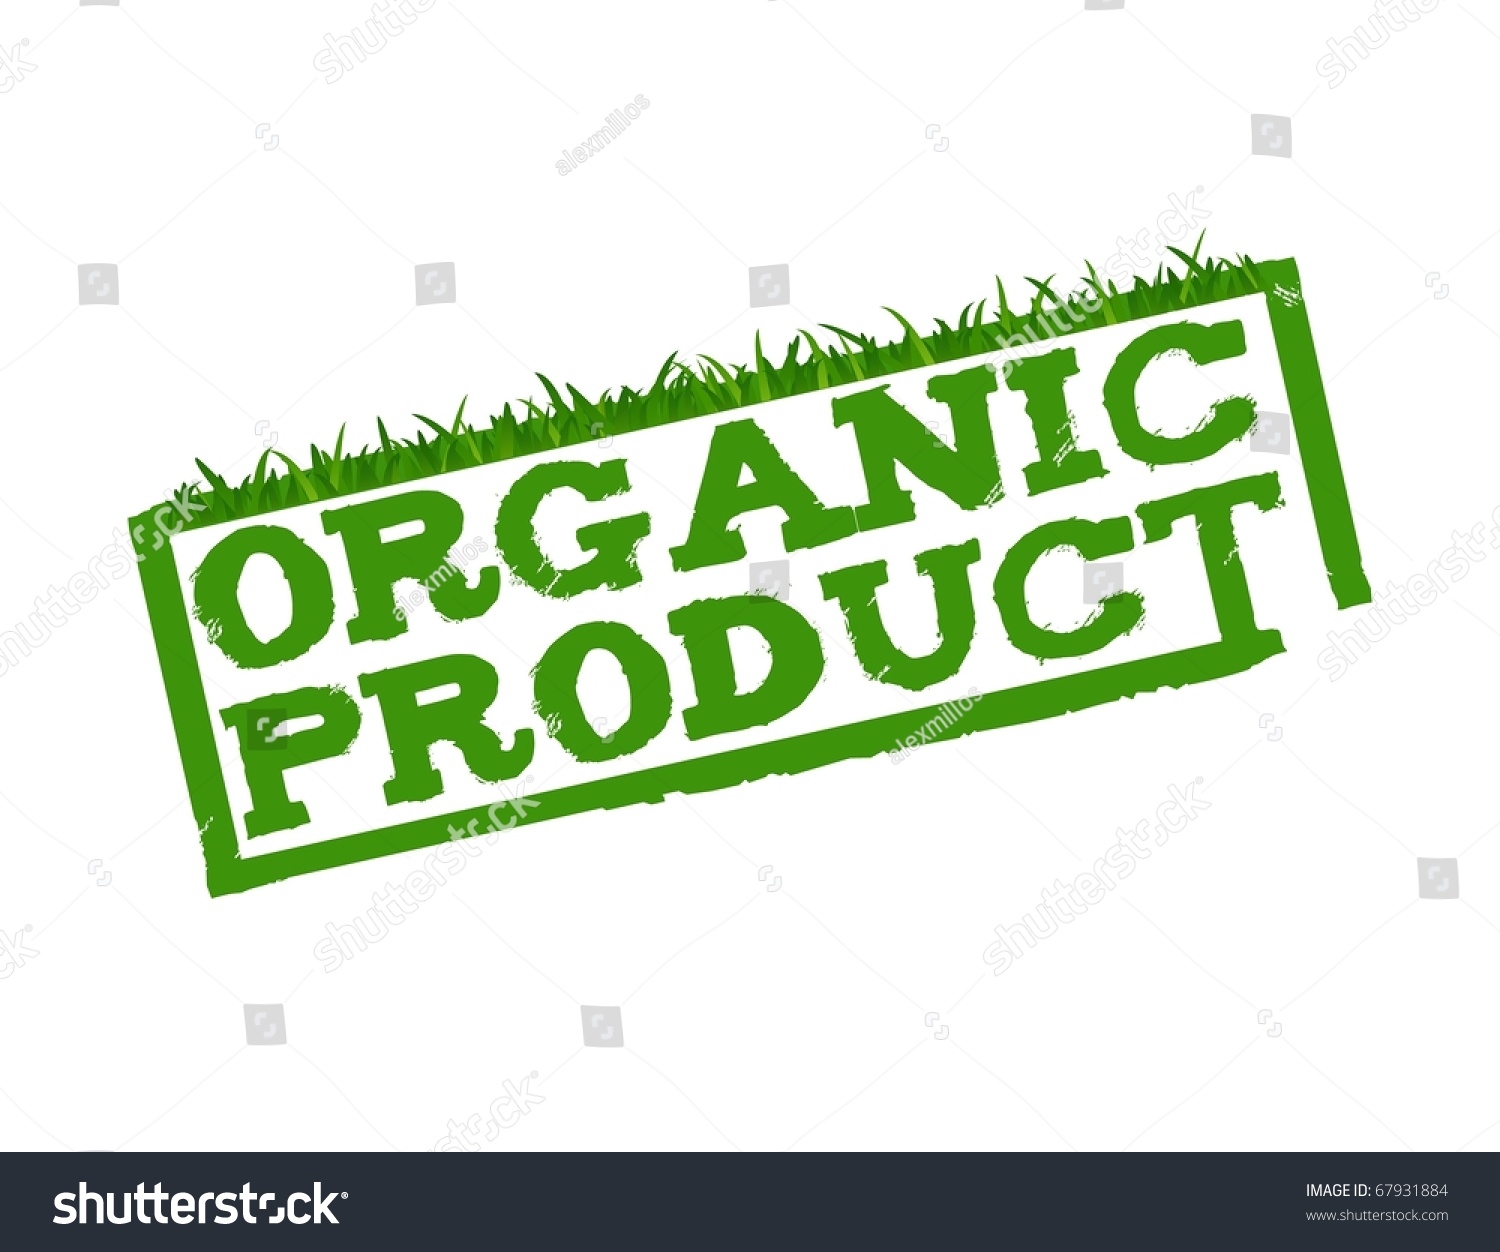 Organic Product sign isolated in white. #67931884